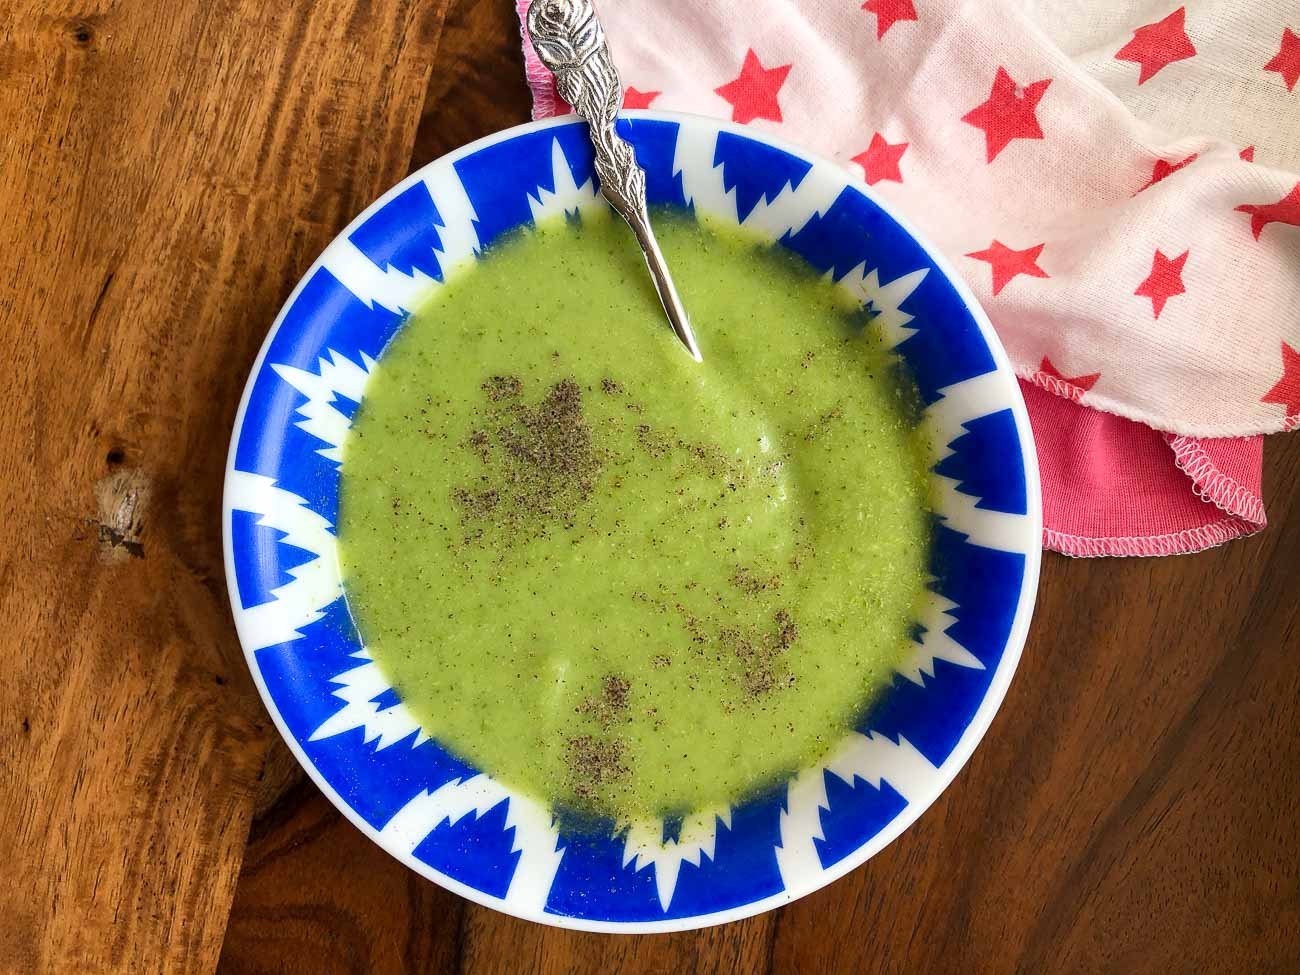 Broccoli Soup Recipe - For Babies/Toddlers above 7 months